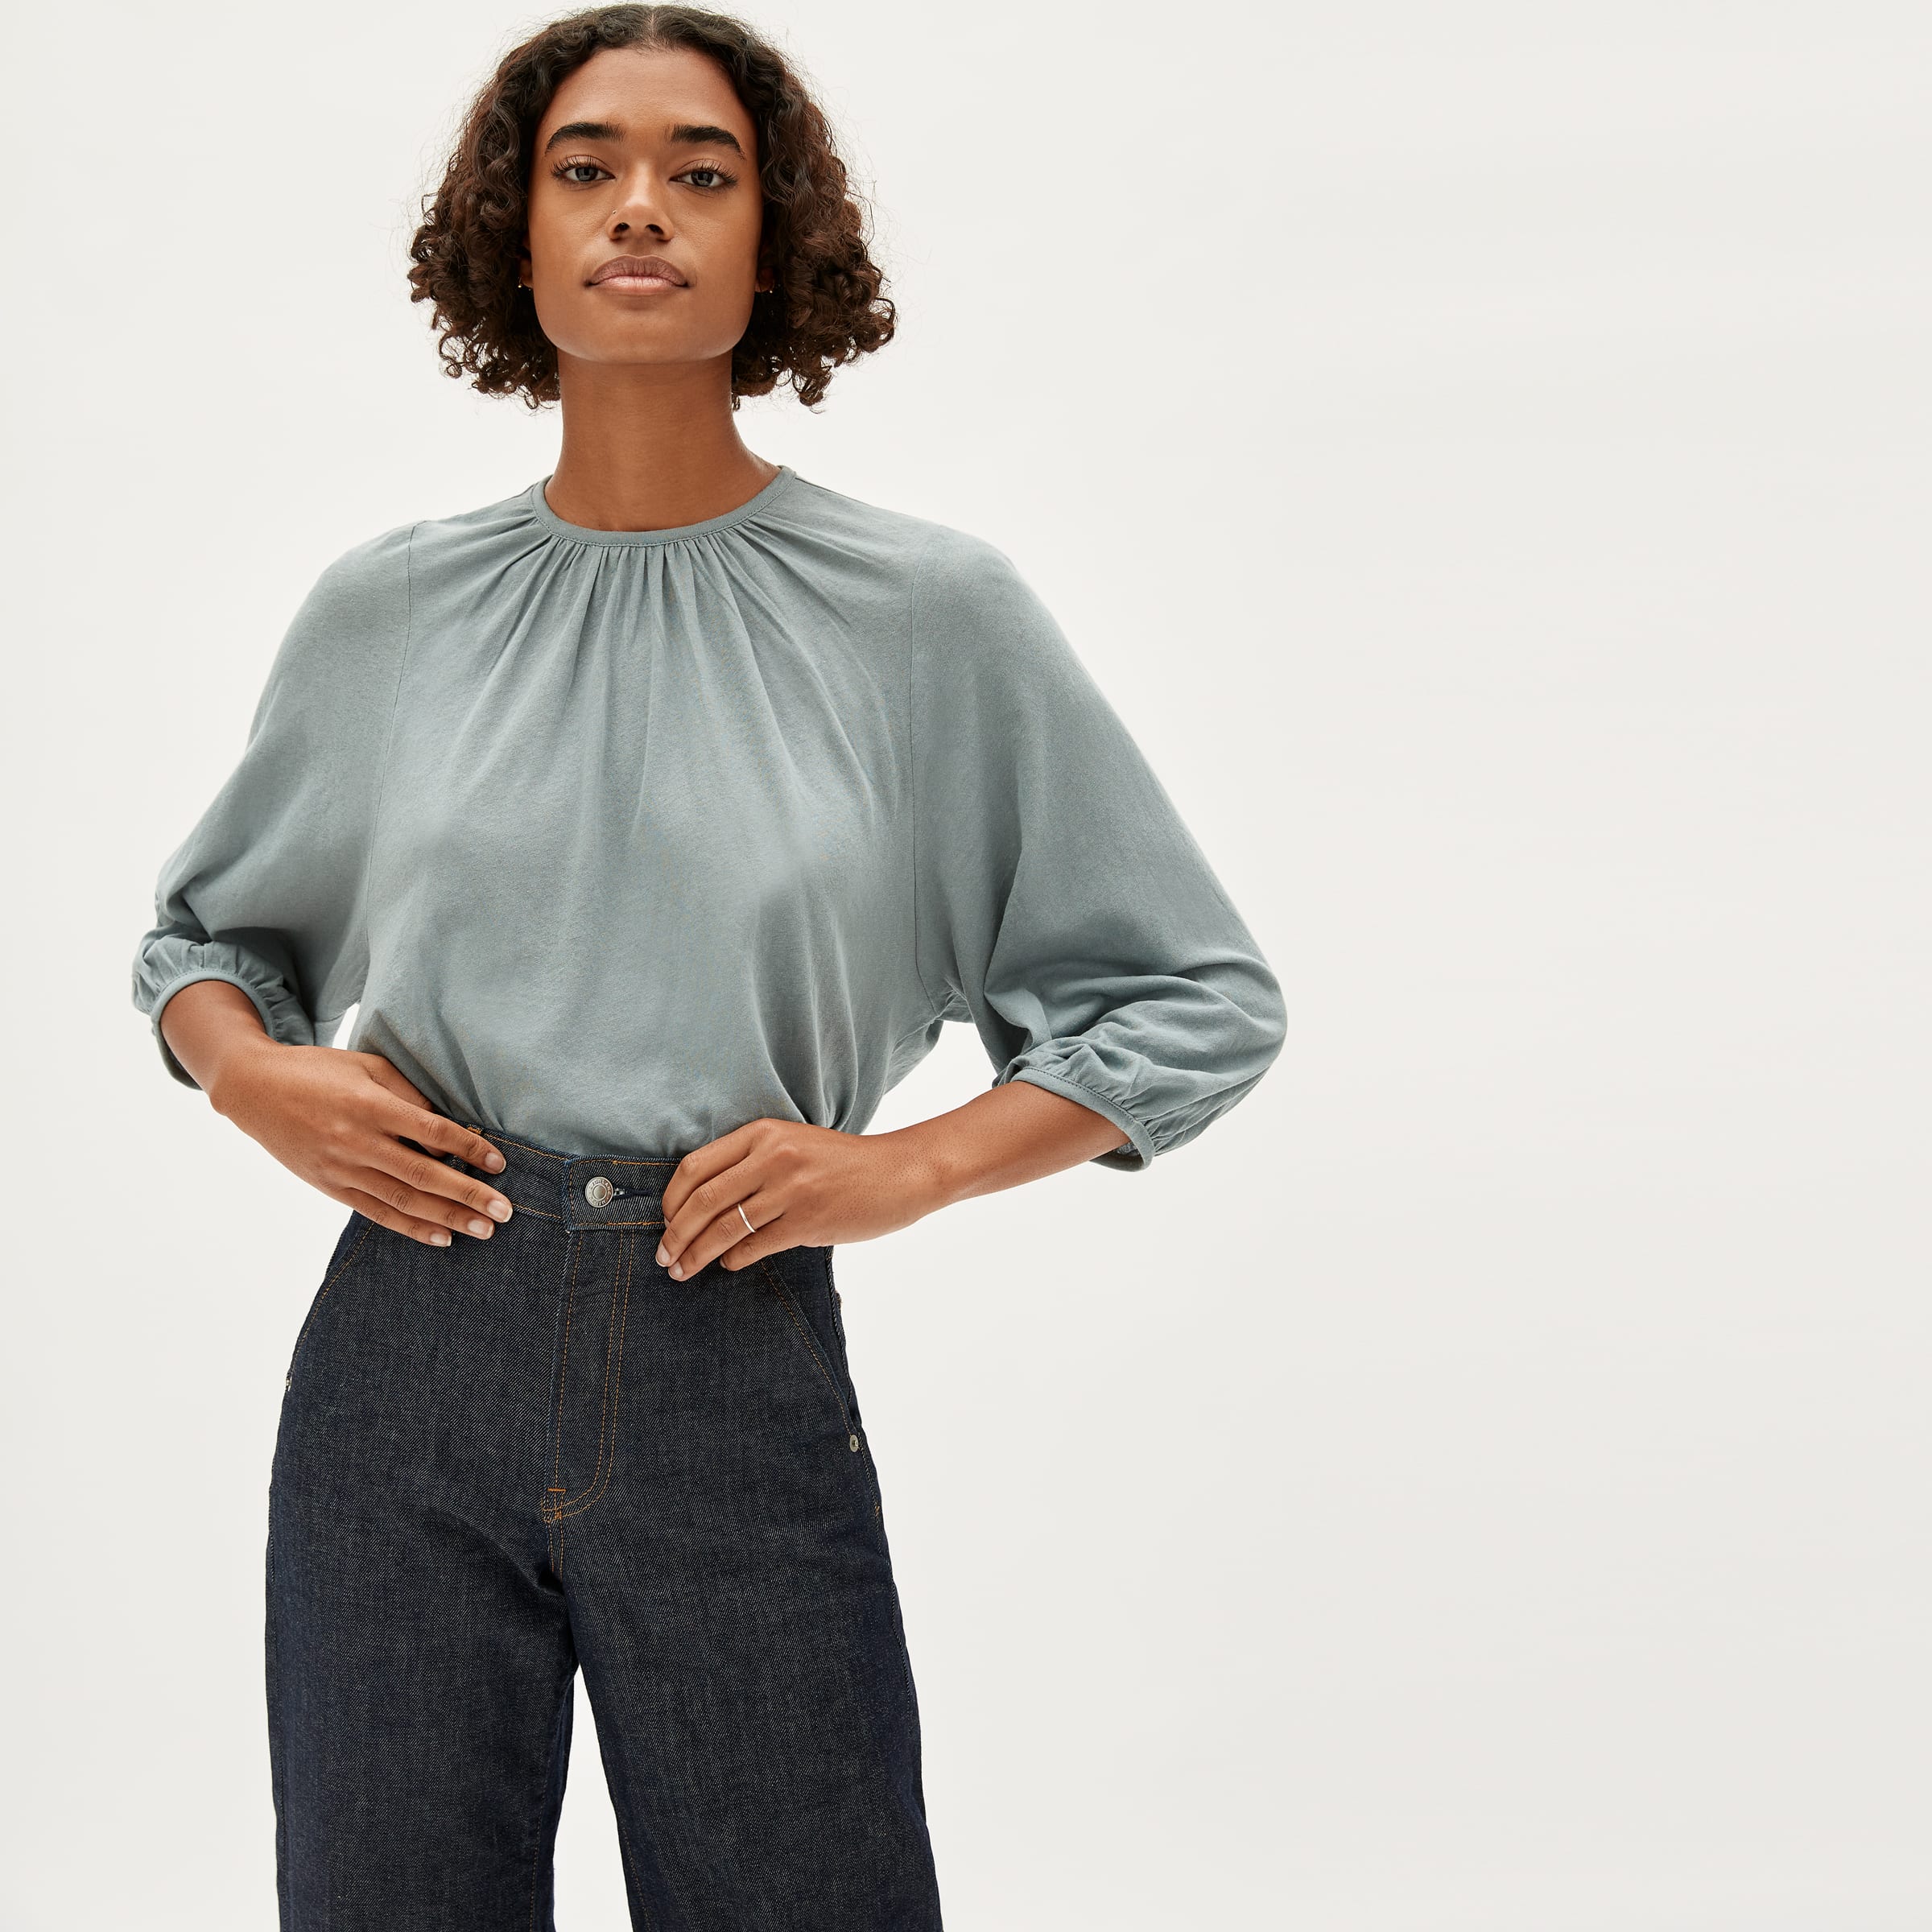 Everlane work from home outfit shirts.